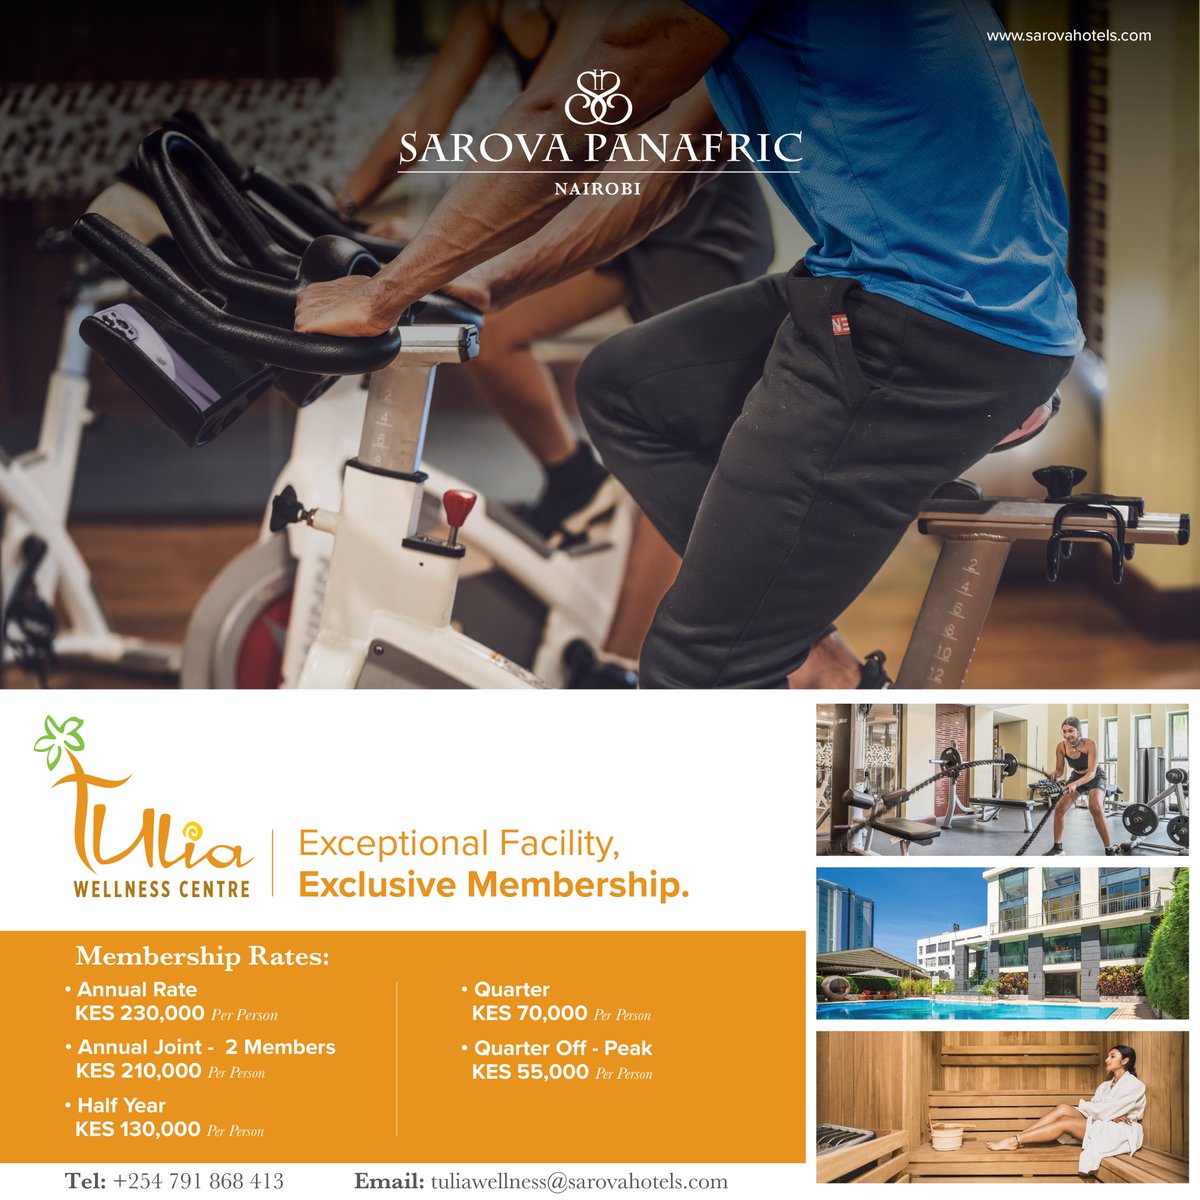 Exceptional Facility! Exclusive Membership! Uncover a sanctuary of personalized fitness, calming spa treatments, and tranquil poolside relaxation at Tulia Wellness Center at Sarova Panafric Hotel in Nairobi. Our expert trainers empower you while the sauna and steam room